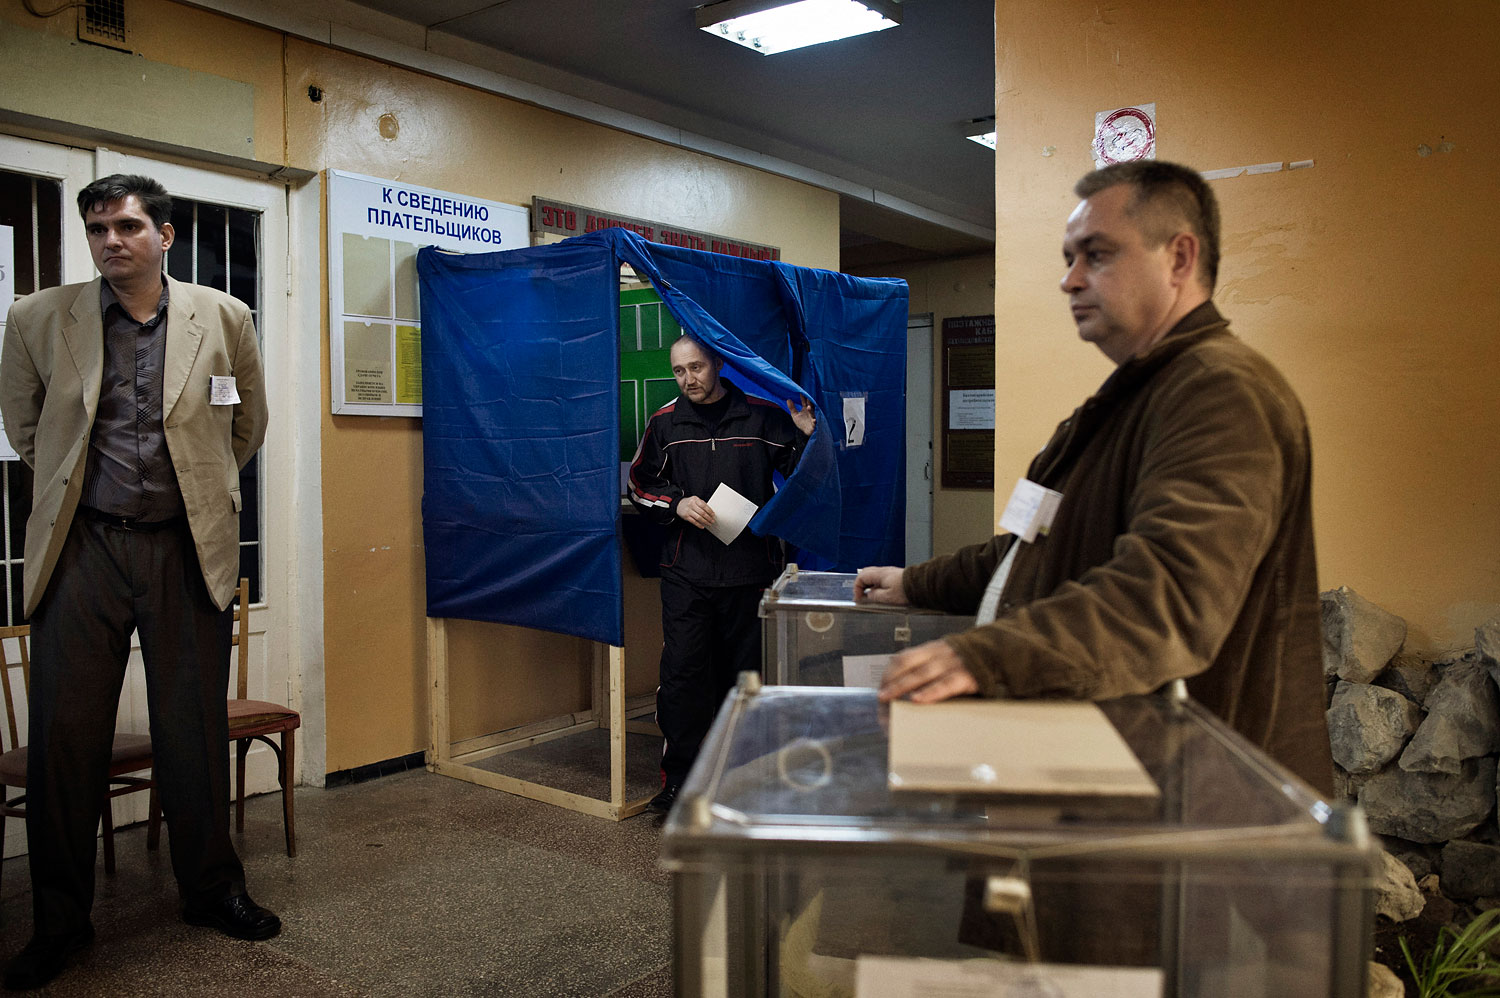 Sergei Yurchenko, the leader of a pro-Russian paramilitary force in Crimea, votes in his hometown Bakhchysarai on March 16, 2014